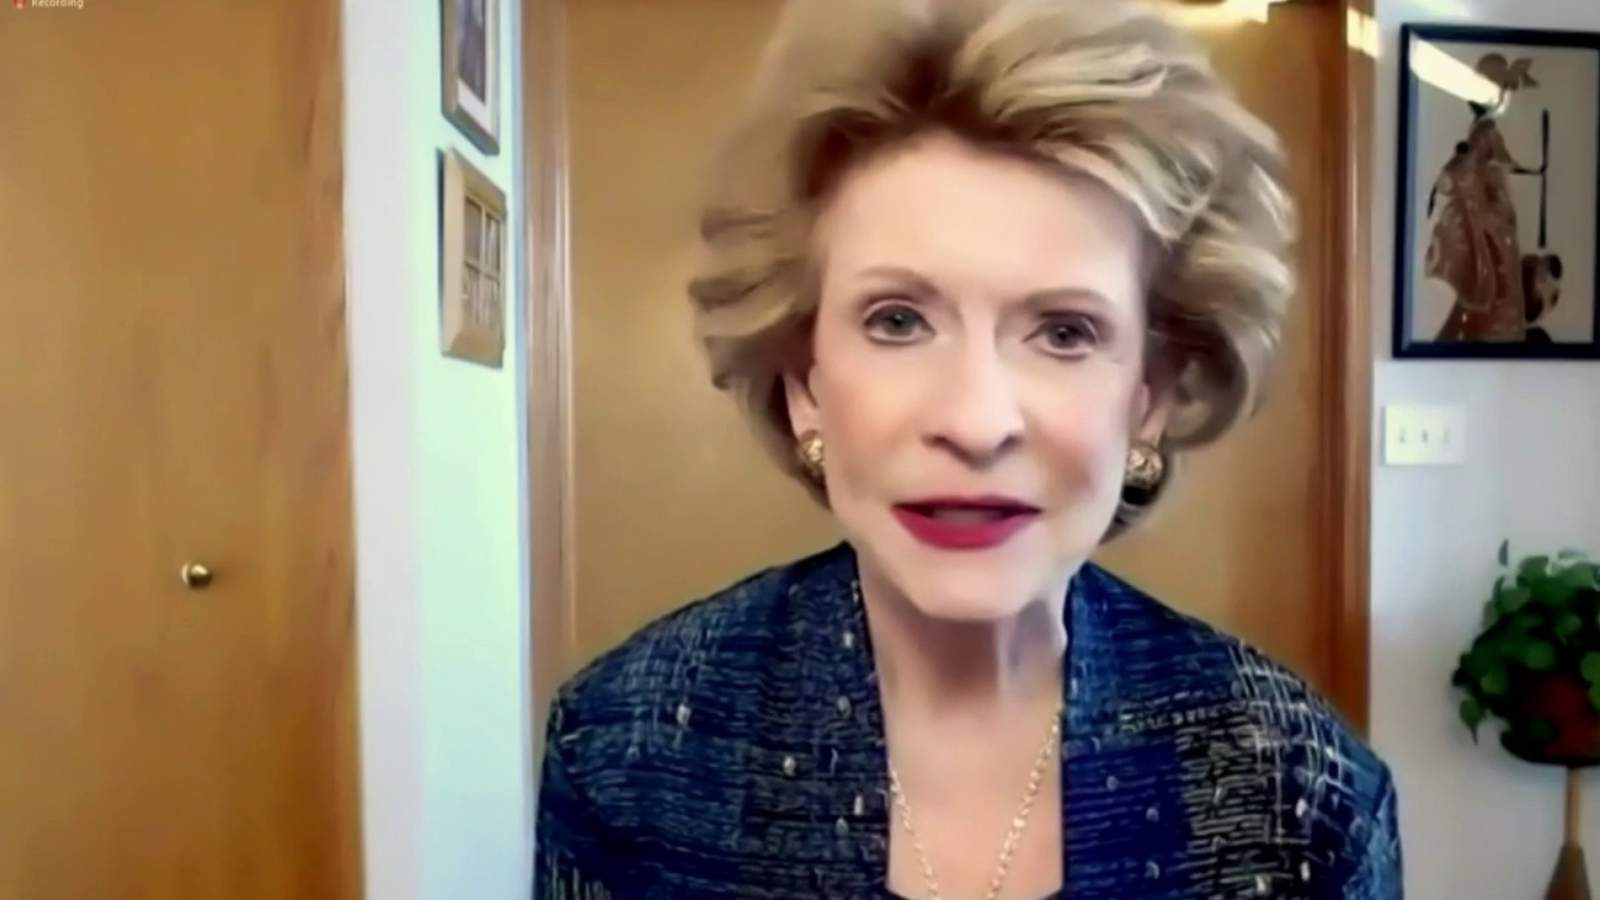 Flashpoint 1/31/21: Sen. Debbie Stabenow talks 2nd Trump impeachment trial; new Washtenaw County prosecutor shaking things up